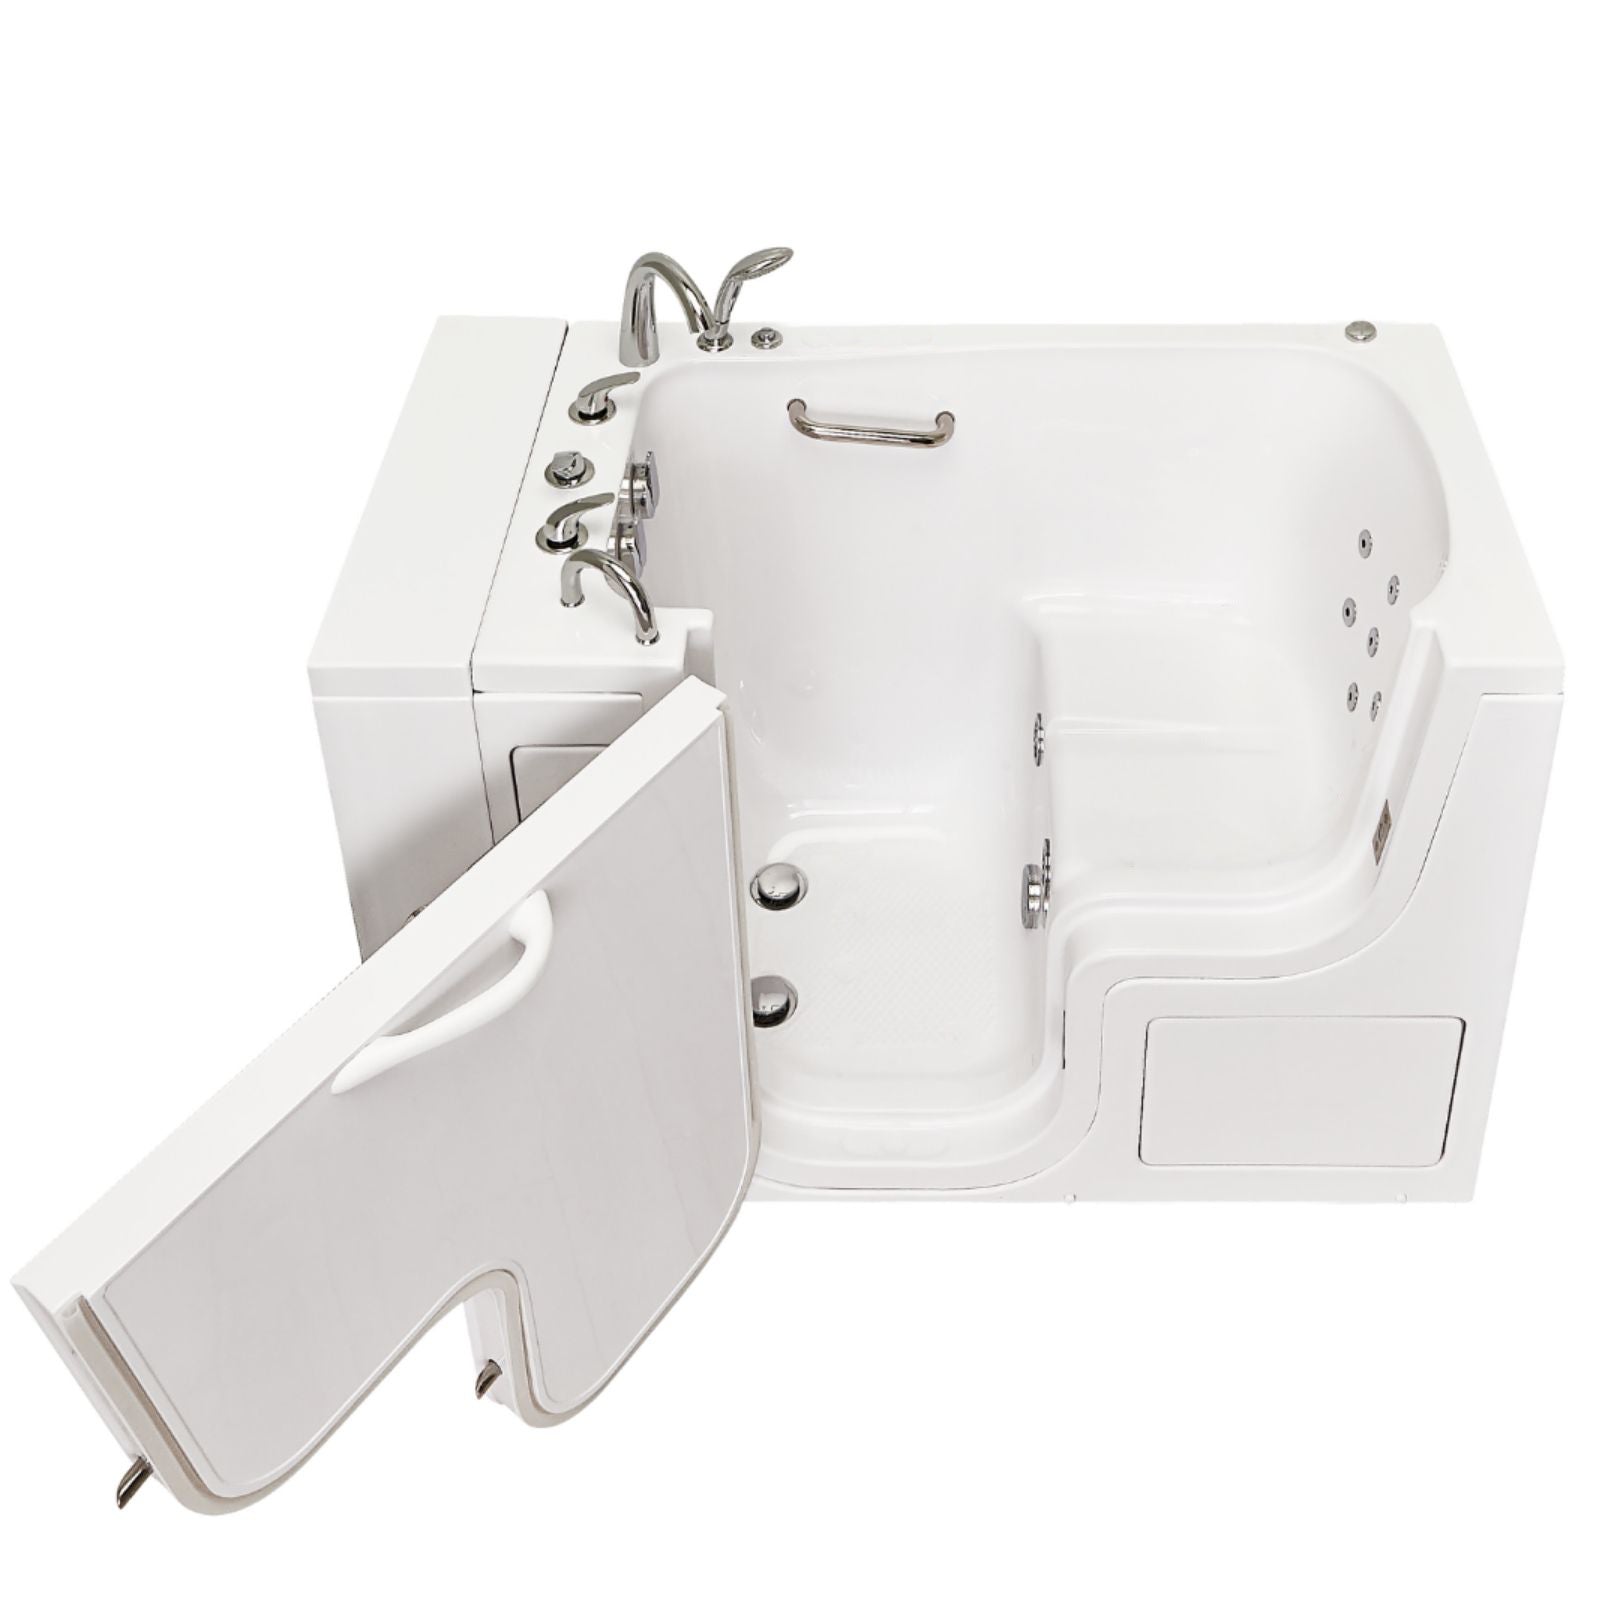 Ella Wheelchair Transfer 32"x52" Acrylic Hydro Massage Walk-In Bathtub with Left Outward Swing Door, 2 Piece Fast Fill Faucet, 2" Dual Drain,  24” wide seat, 2 stainless steel grab bars, L-shape wheelchair transfer outswing door in a white background.